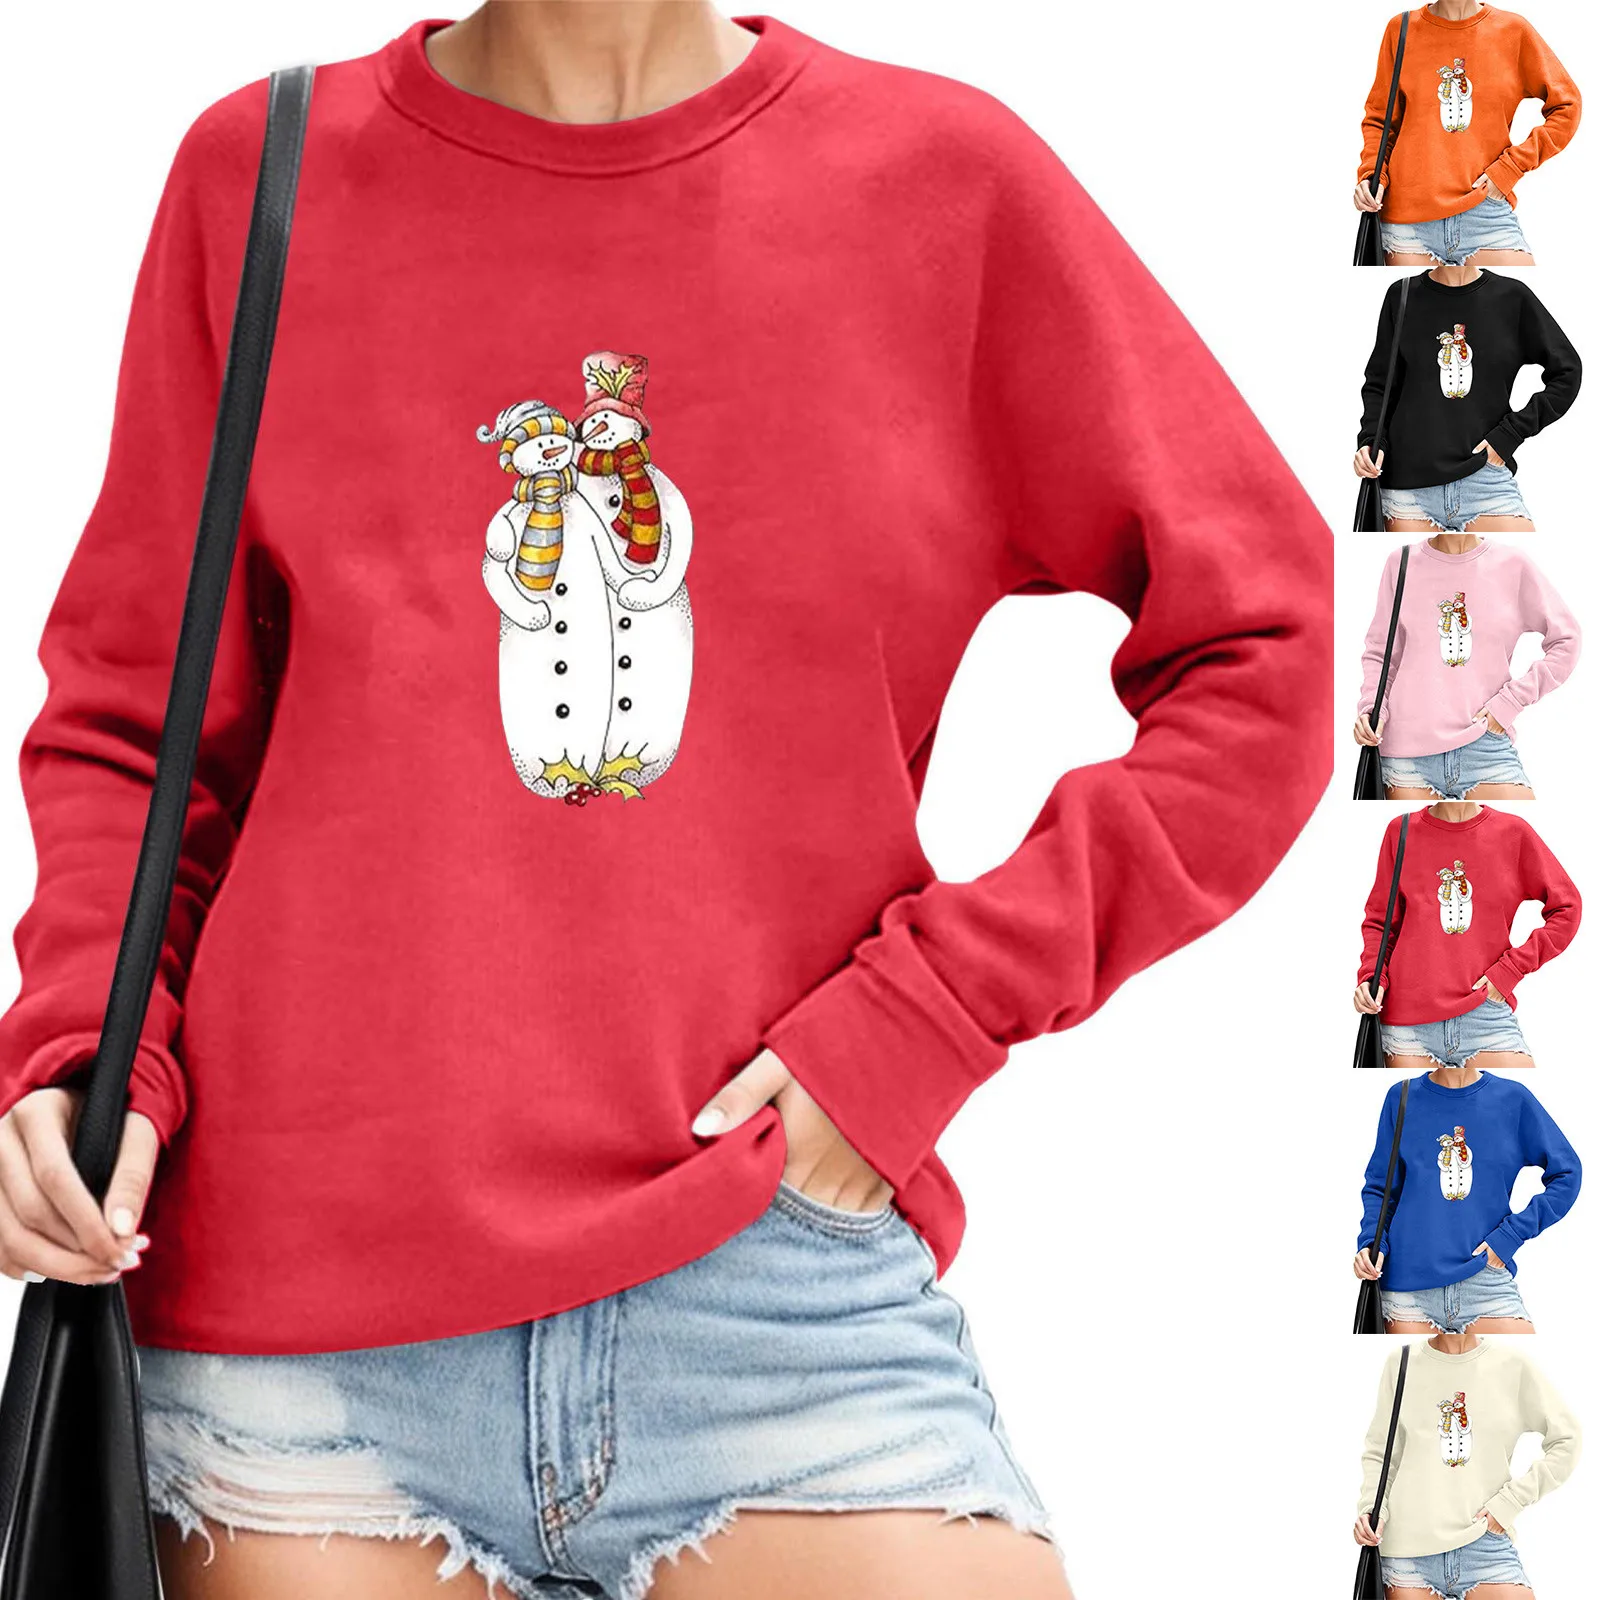 

Women's Novelty Couples Christmas Sweatershirts Unisex Christmas Snowman Patterned Retro blouse tops Autumn Spring Tracksuit